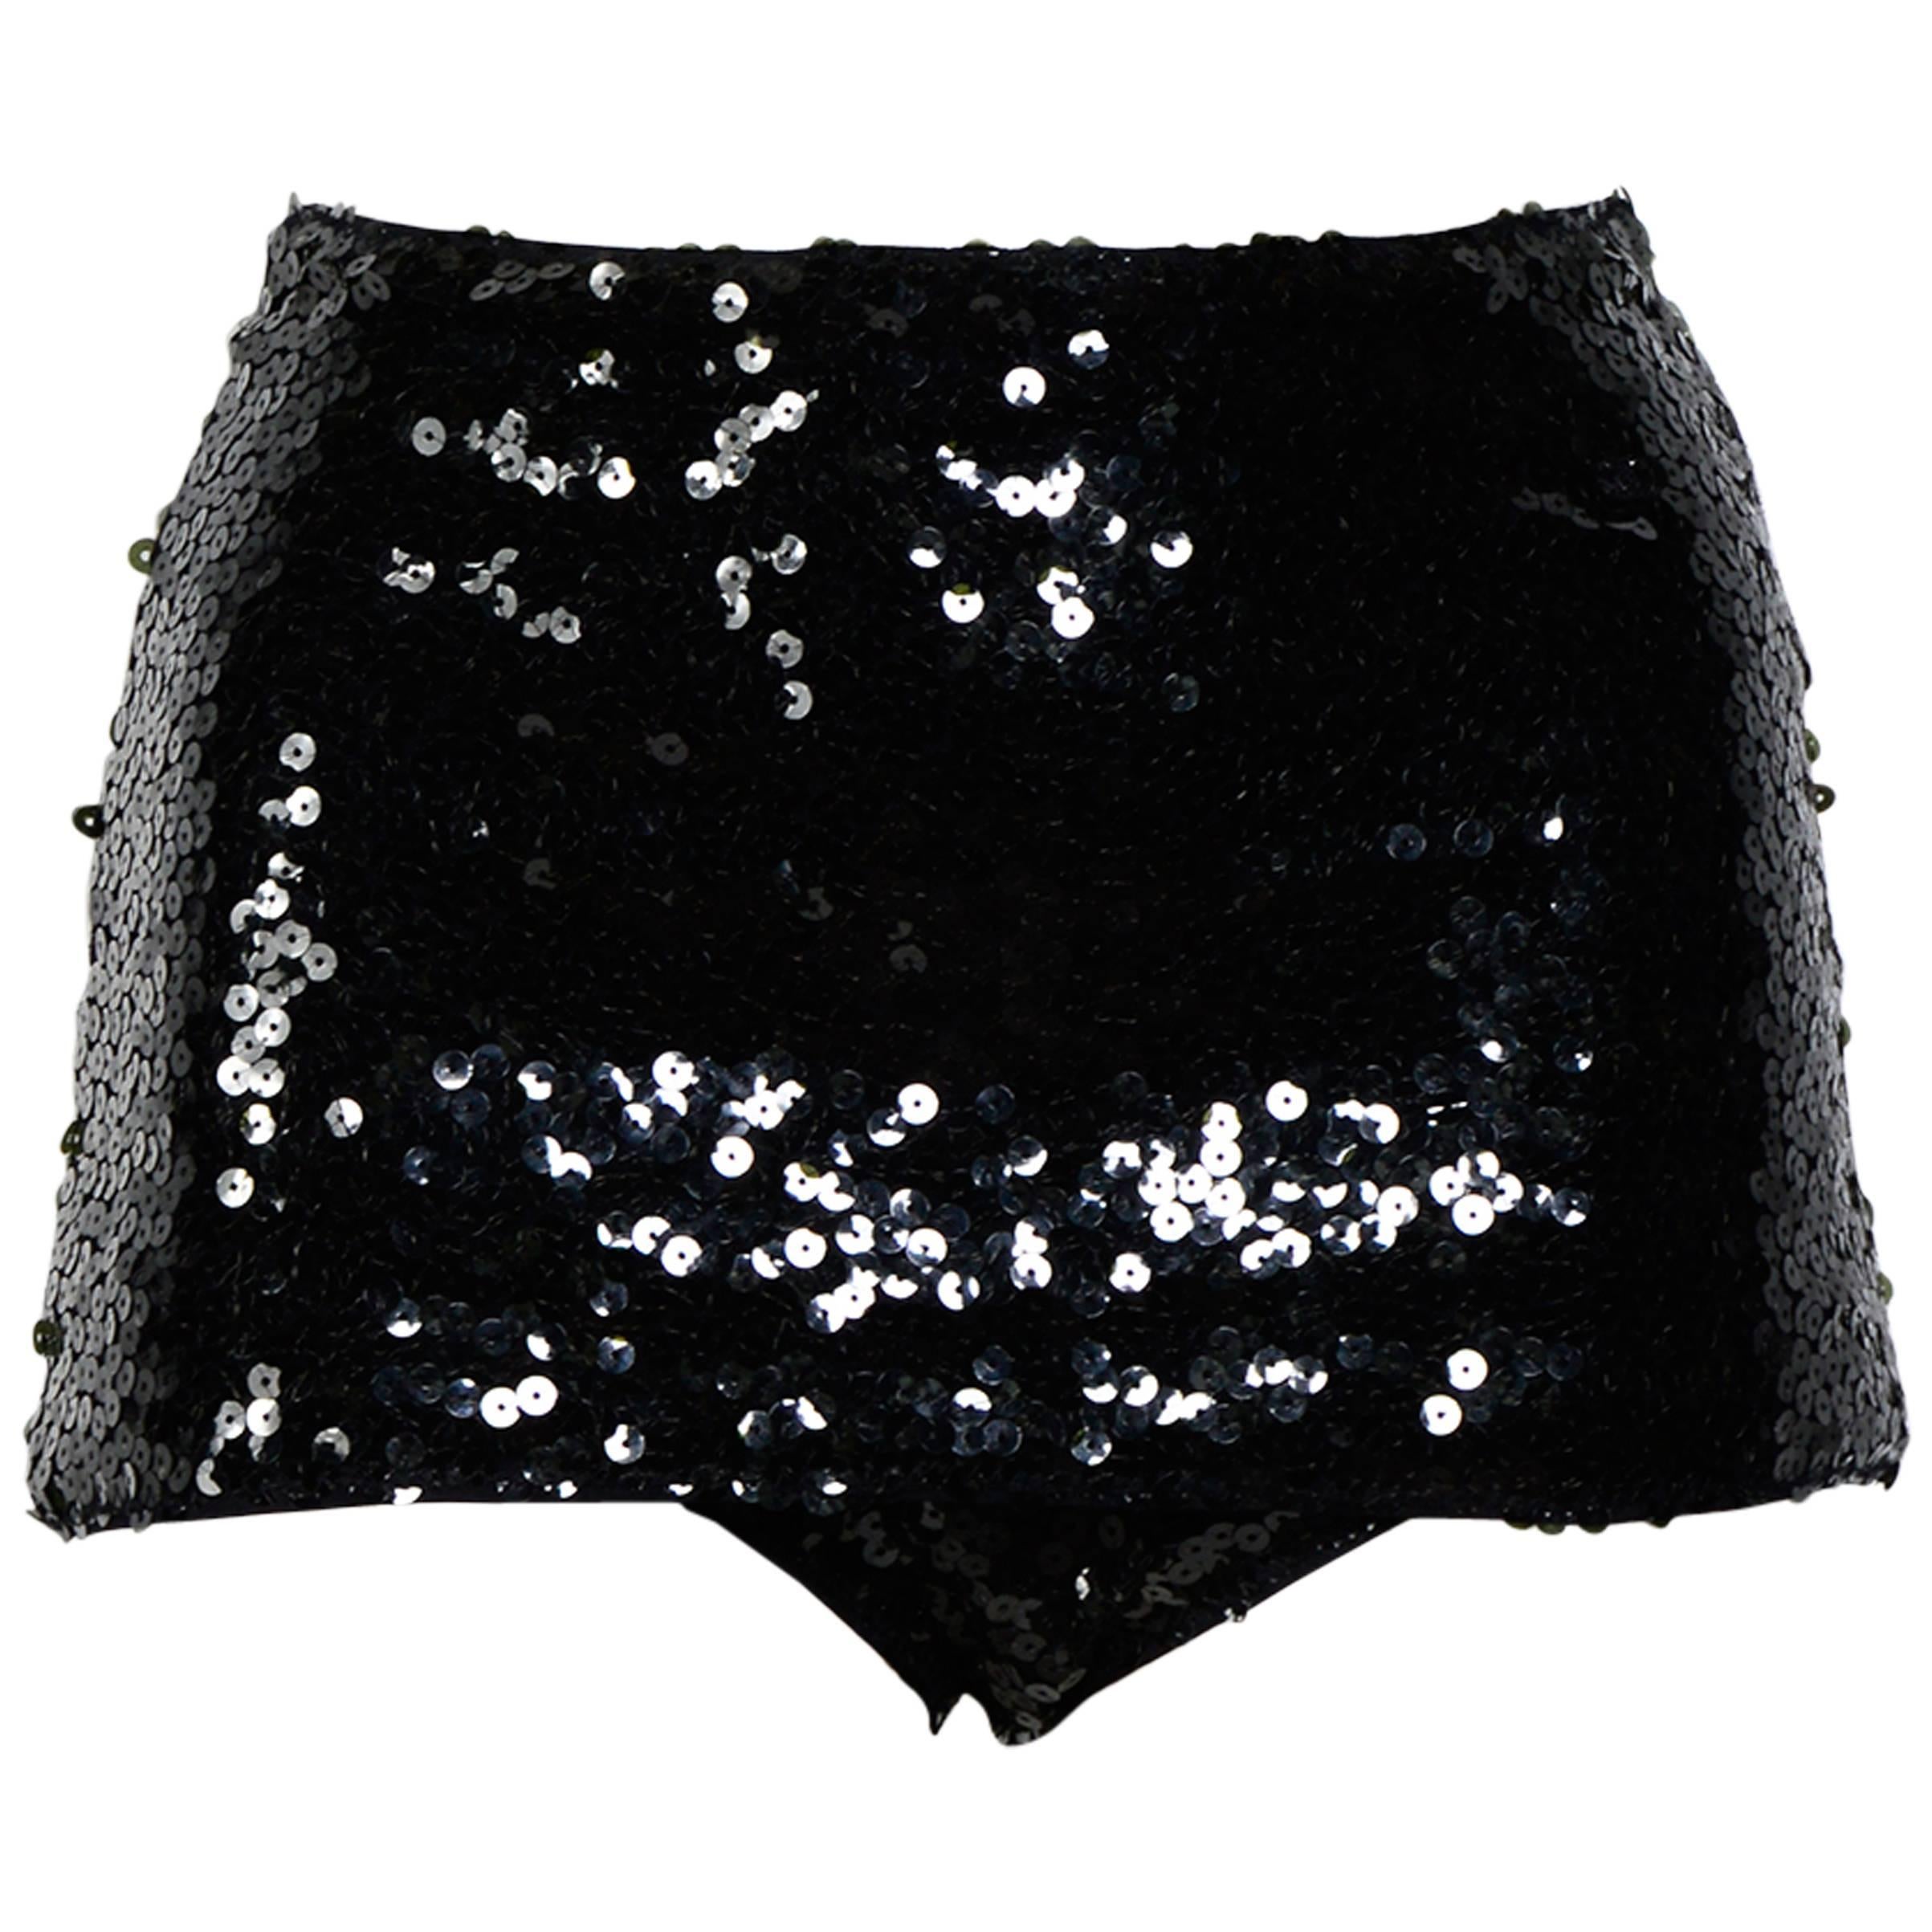 CHANEL Spring 2007 Runway Sexy Black Sequined Hot Pants